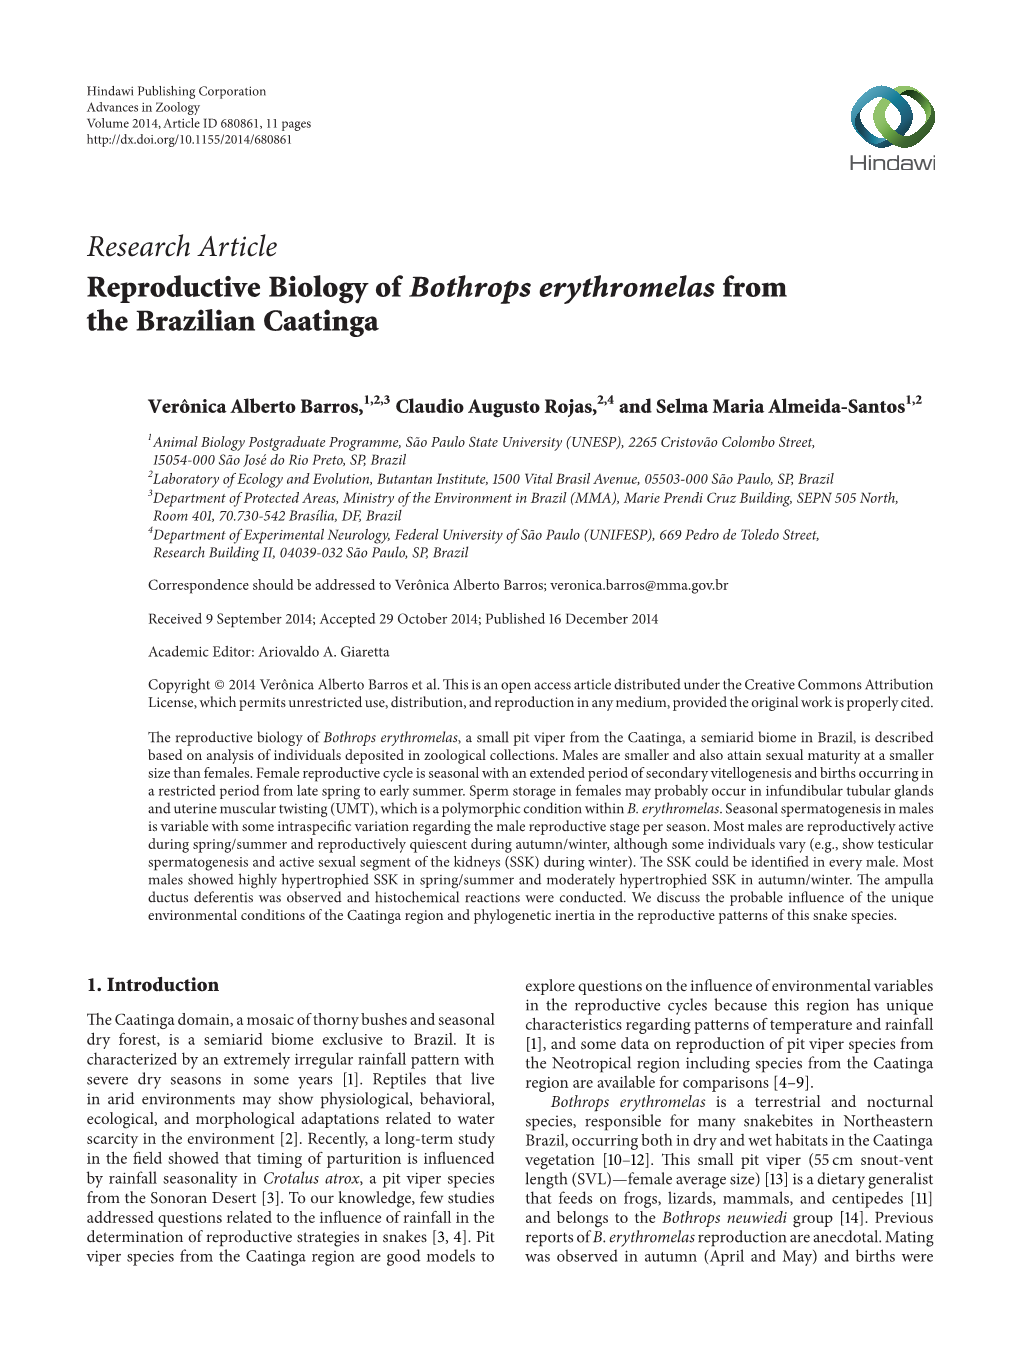 Research Article Reproductive Biology of Bothrops Erythromelas from the Brazilian Caatinga